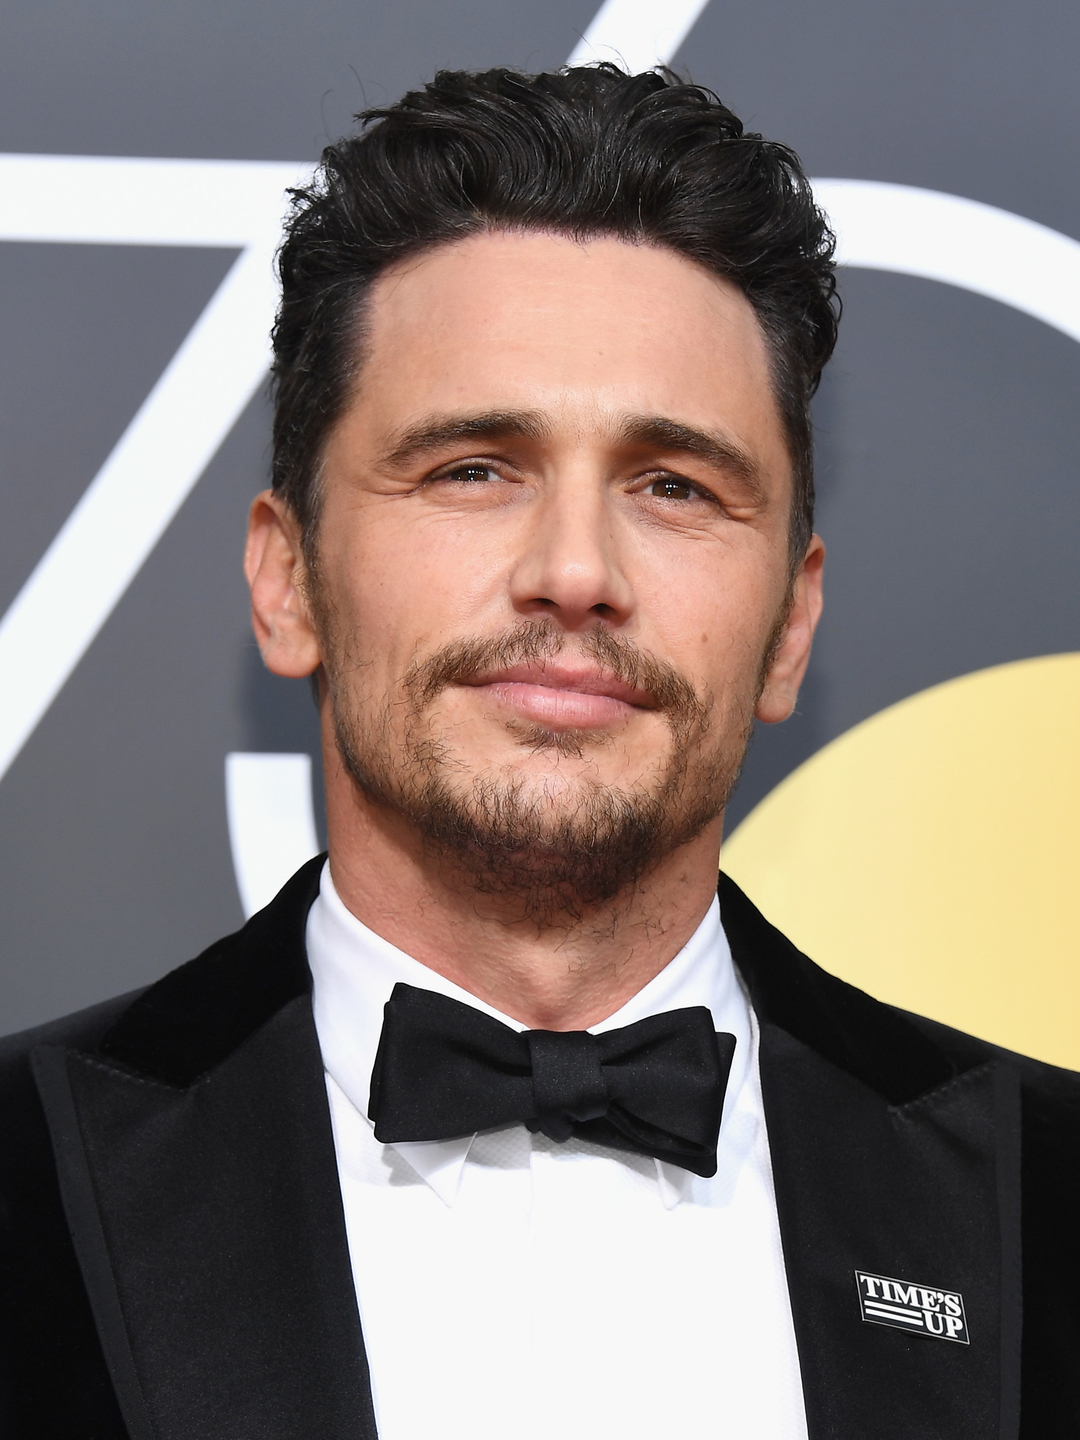 James Franco does he have a wife